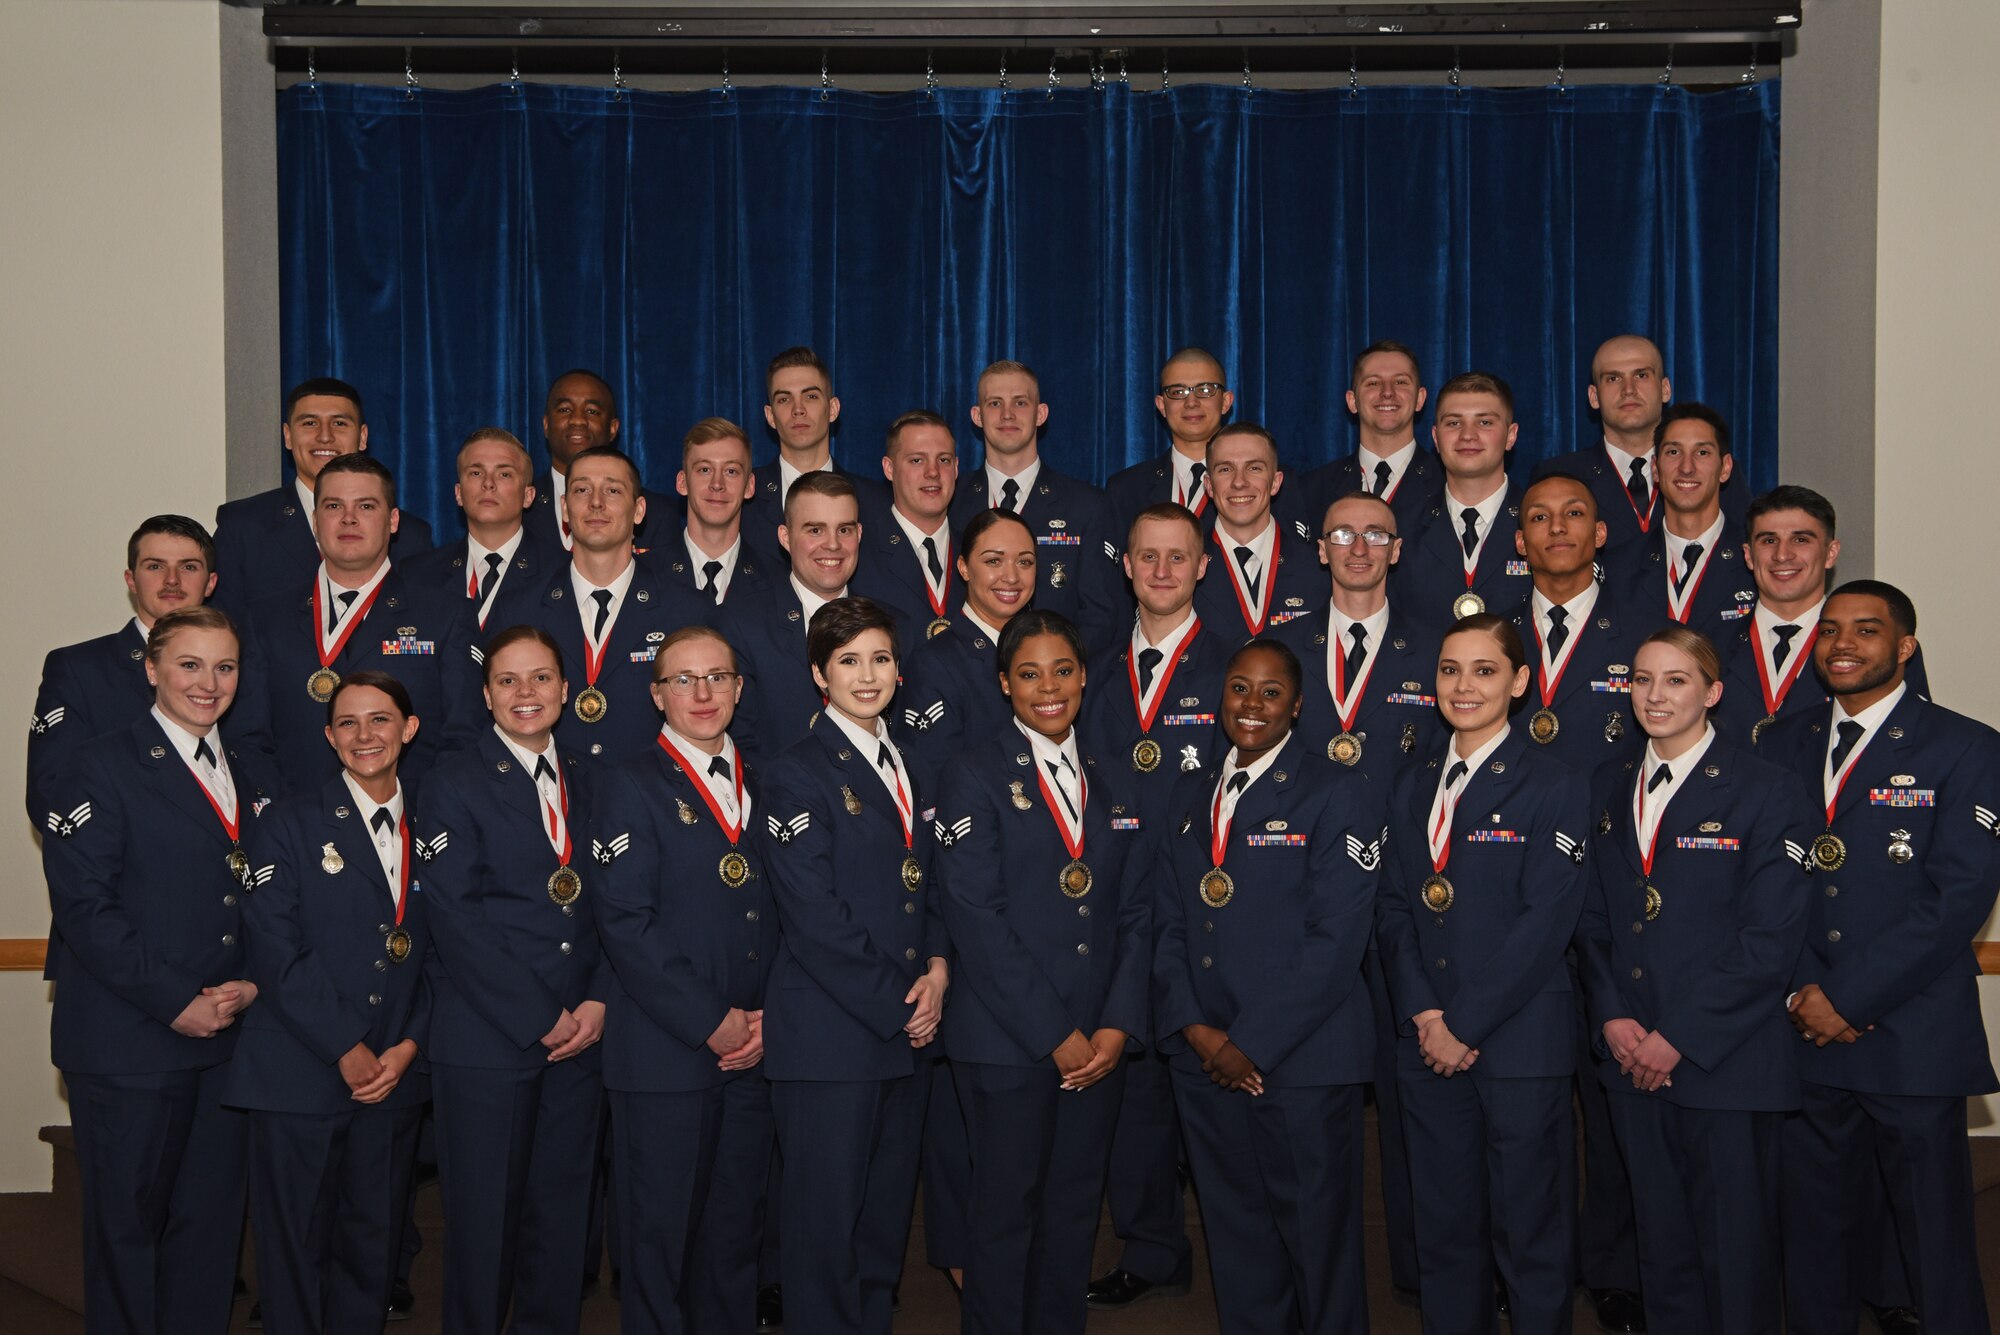 Col. Stacy Jo Huser, 90th Missile Wing commander, and Chief Master Sgt. Gemma Clark, 90th Missile Wing Interim command chief, pose with the graduating Airman Leadership School Class 19-D students in the Trail's End Event Center on F. E. Warren Air Force Base, Wyo., March 27, 2019. Enlisted Airmen must complete the rigorous professional military education course before supervising other Airmen. (U.S. Air Force photo by Senior Airman Nicole Reed)